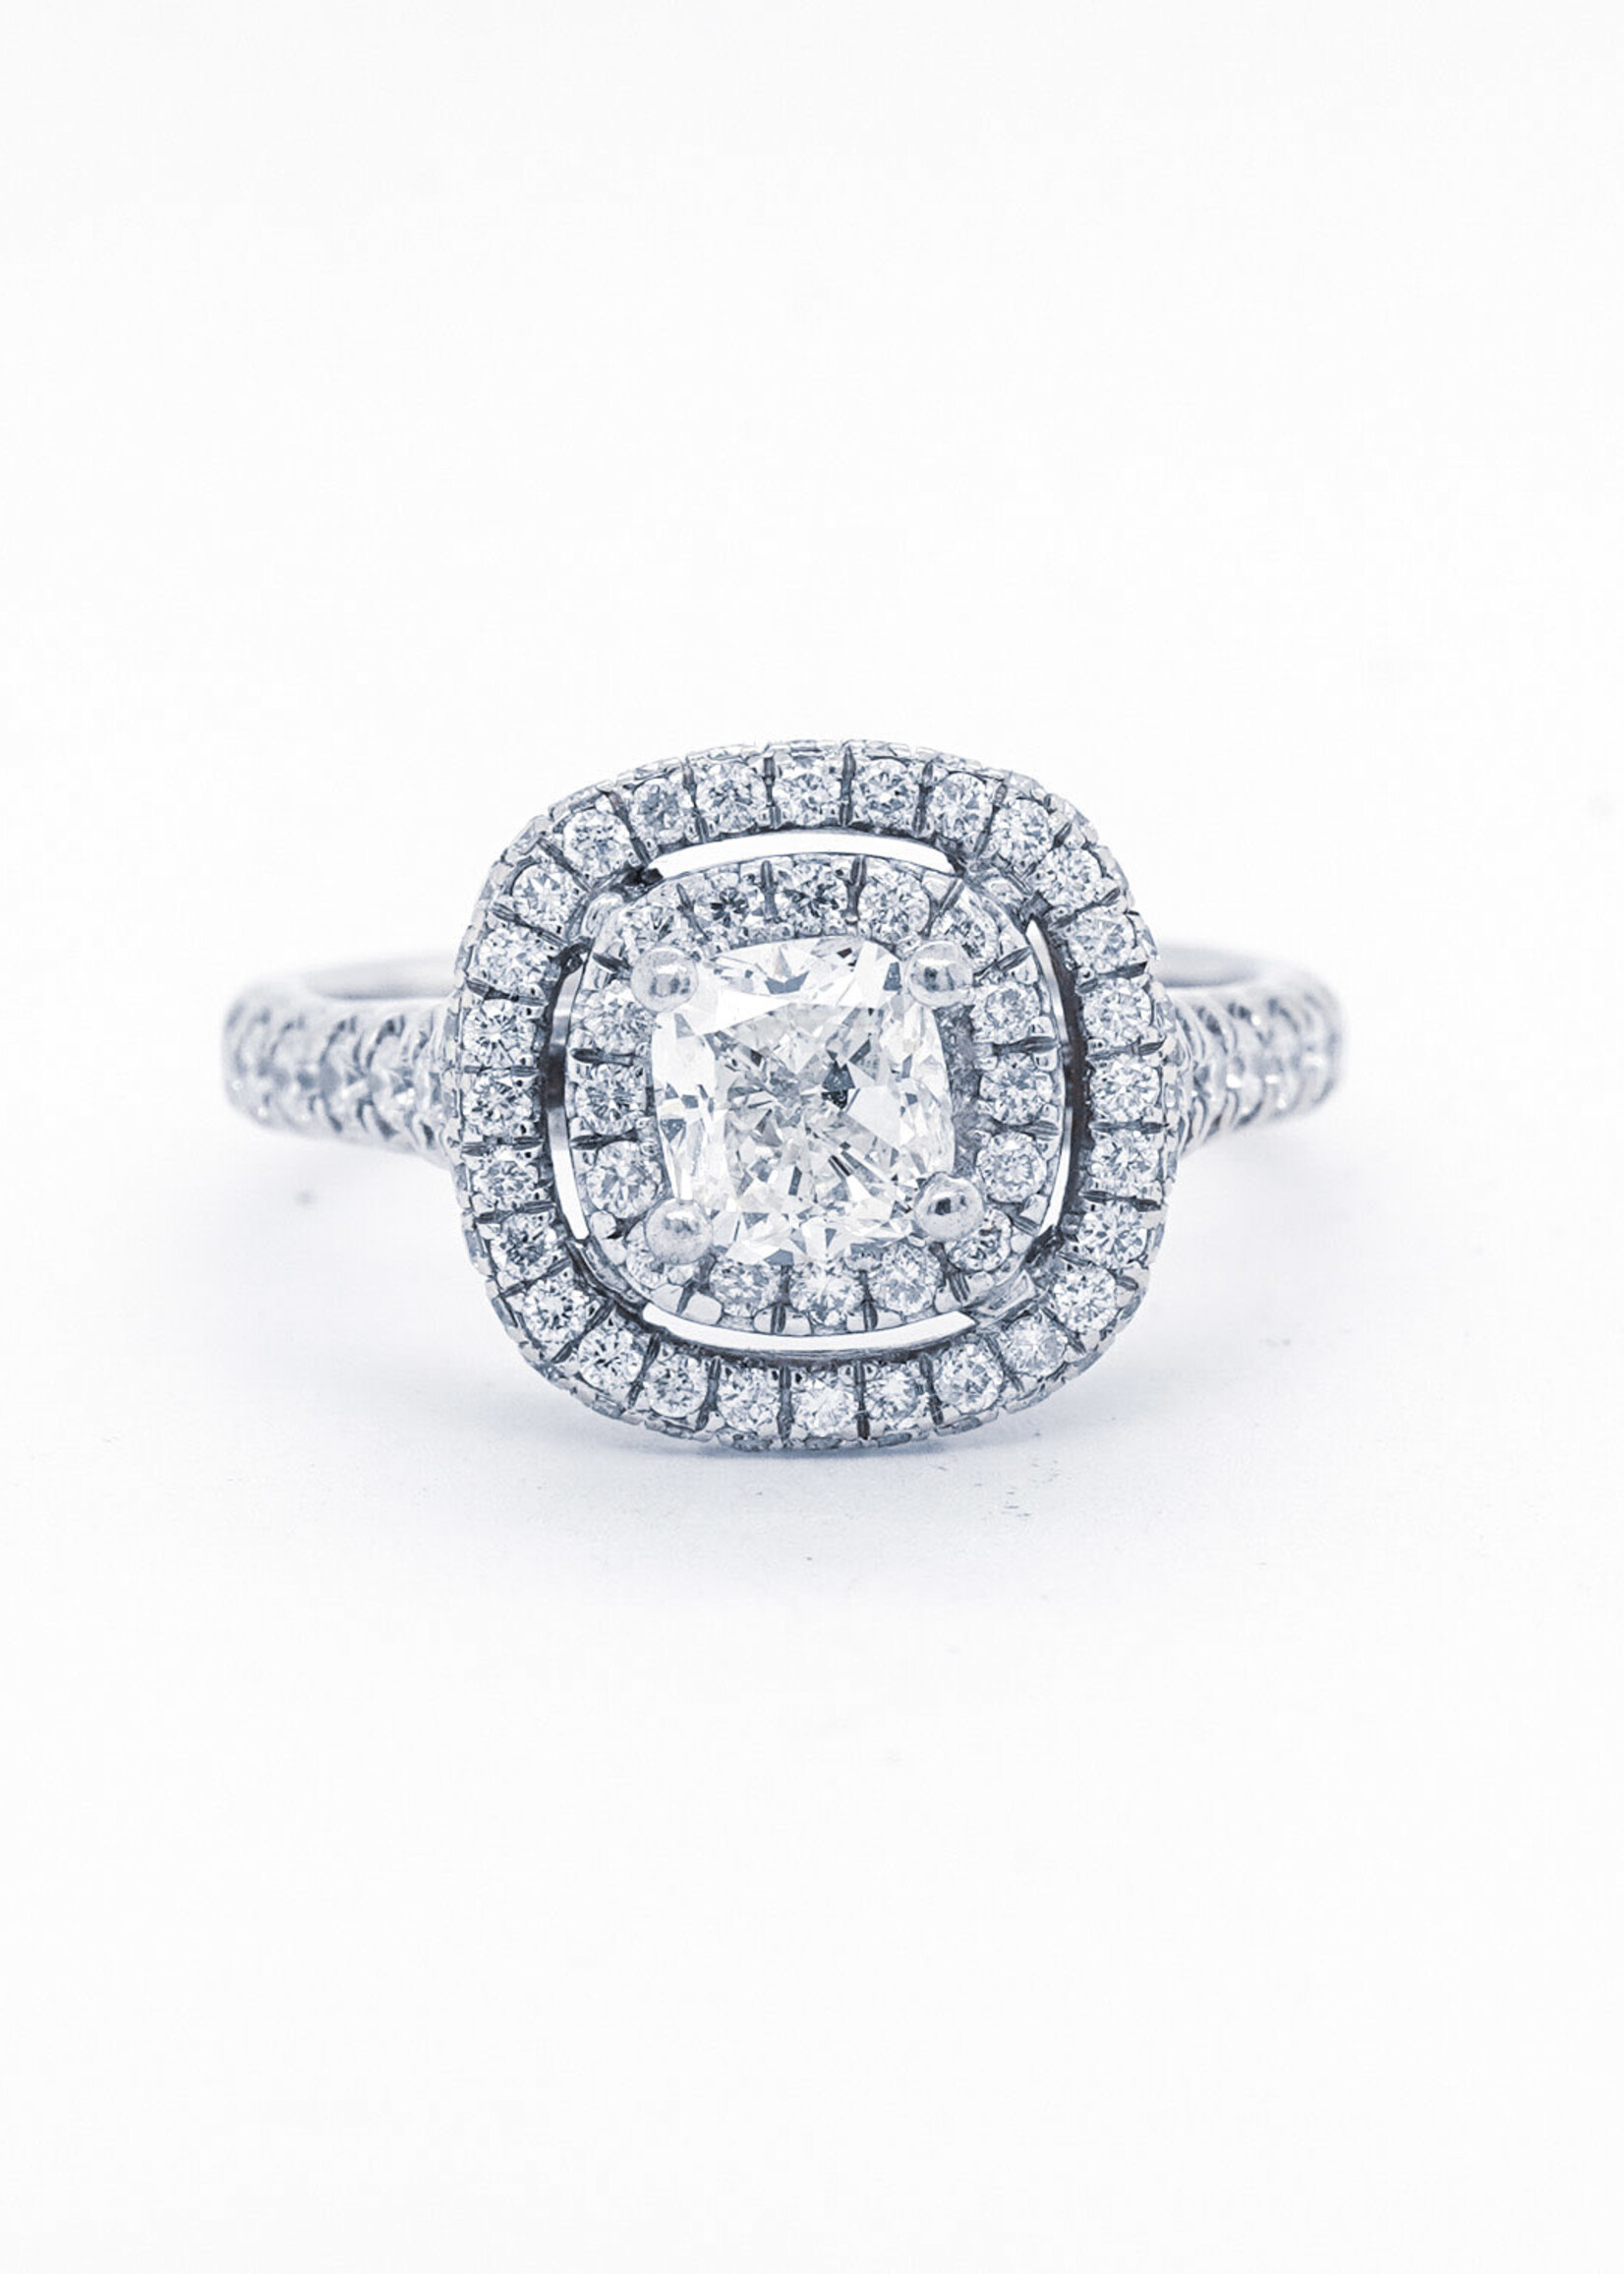 14KW 4.85g 2.0TW (.80ctr) H/SI2 Cushion Cut Diamond Double Halo Engagement Ring (size 5.5)